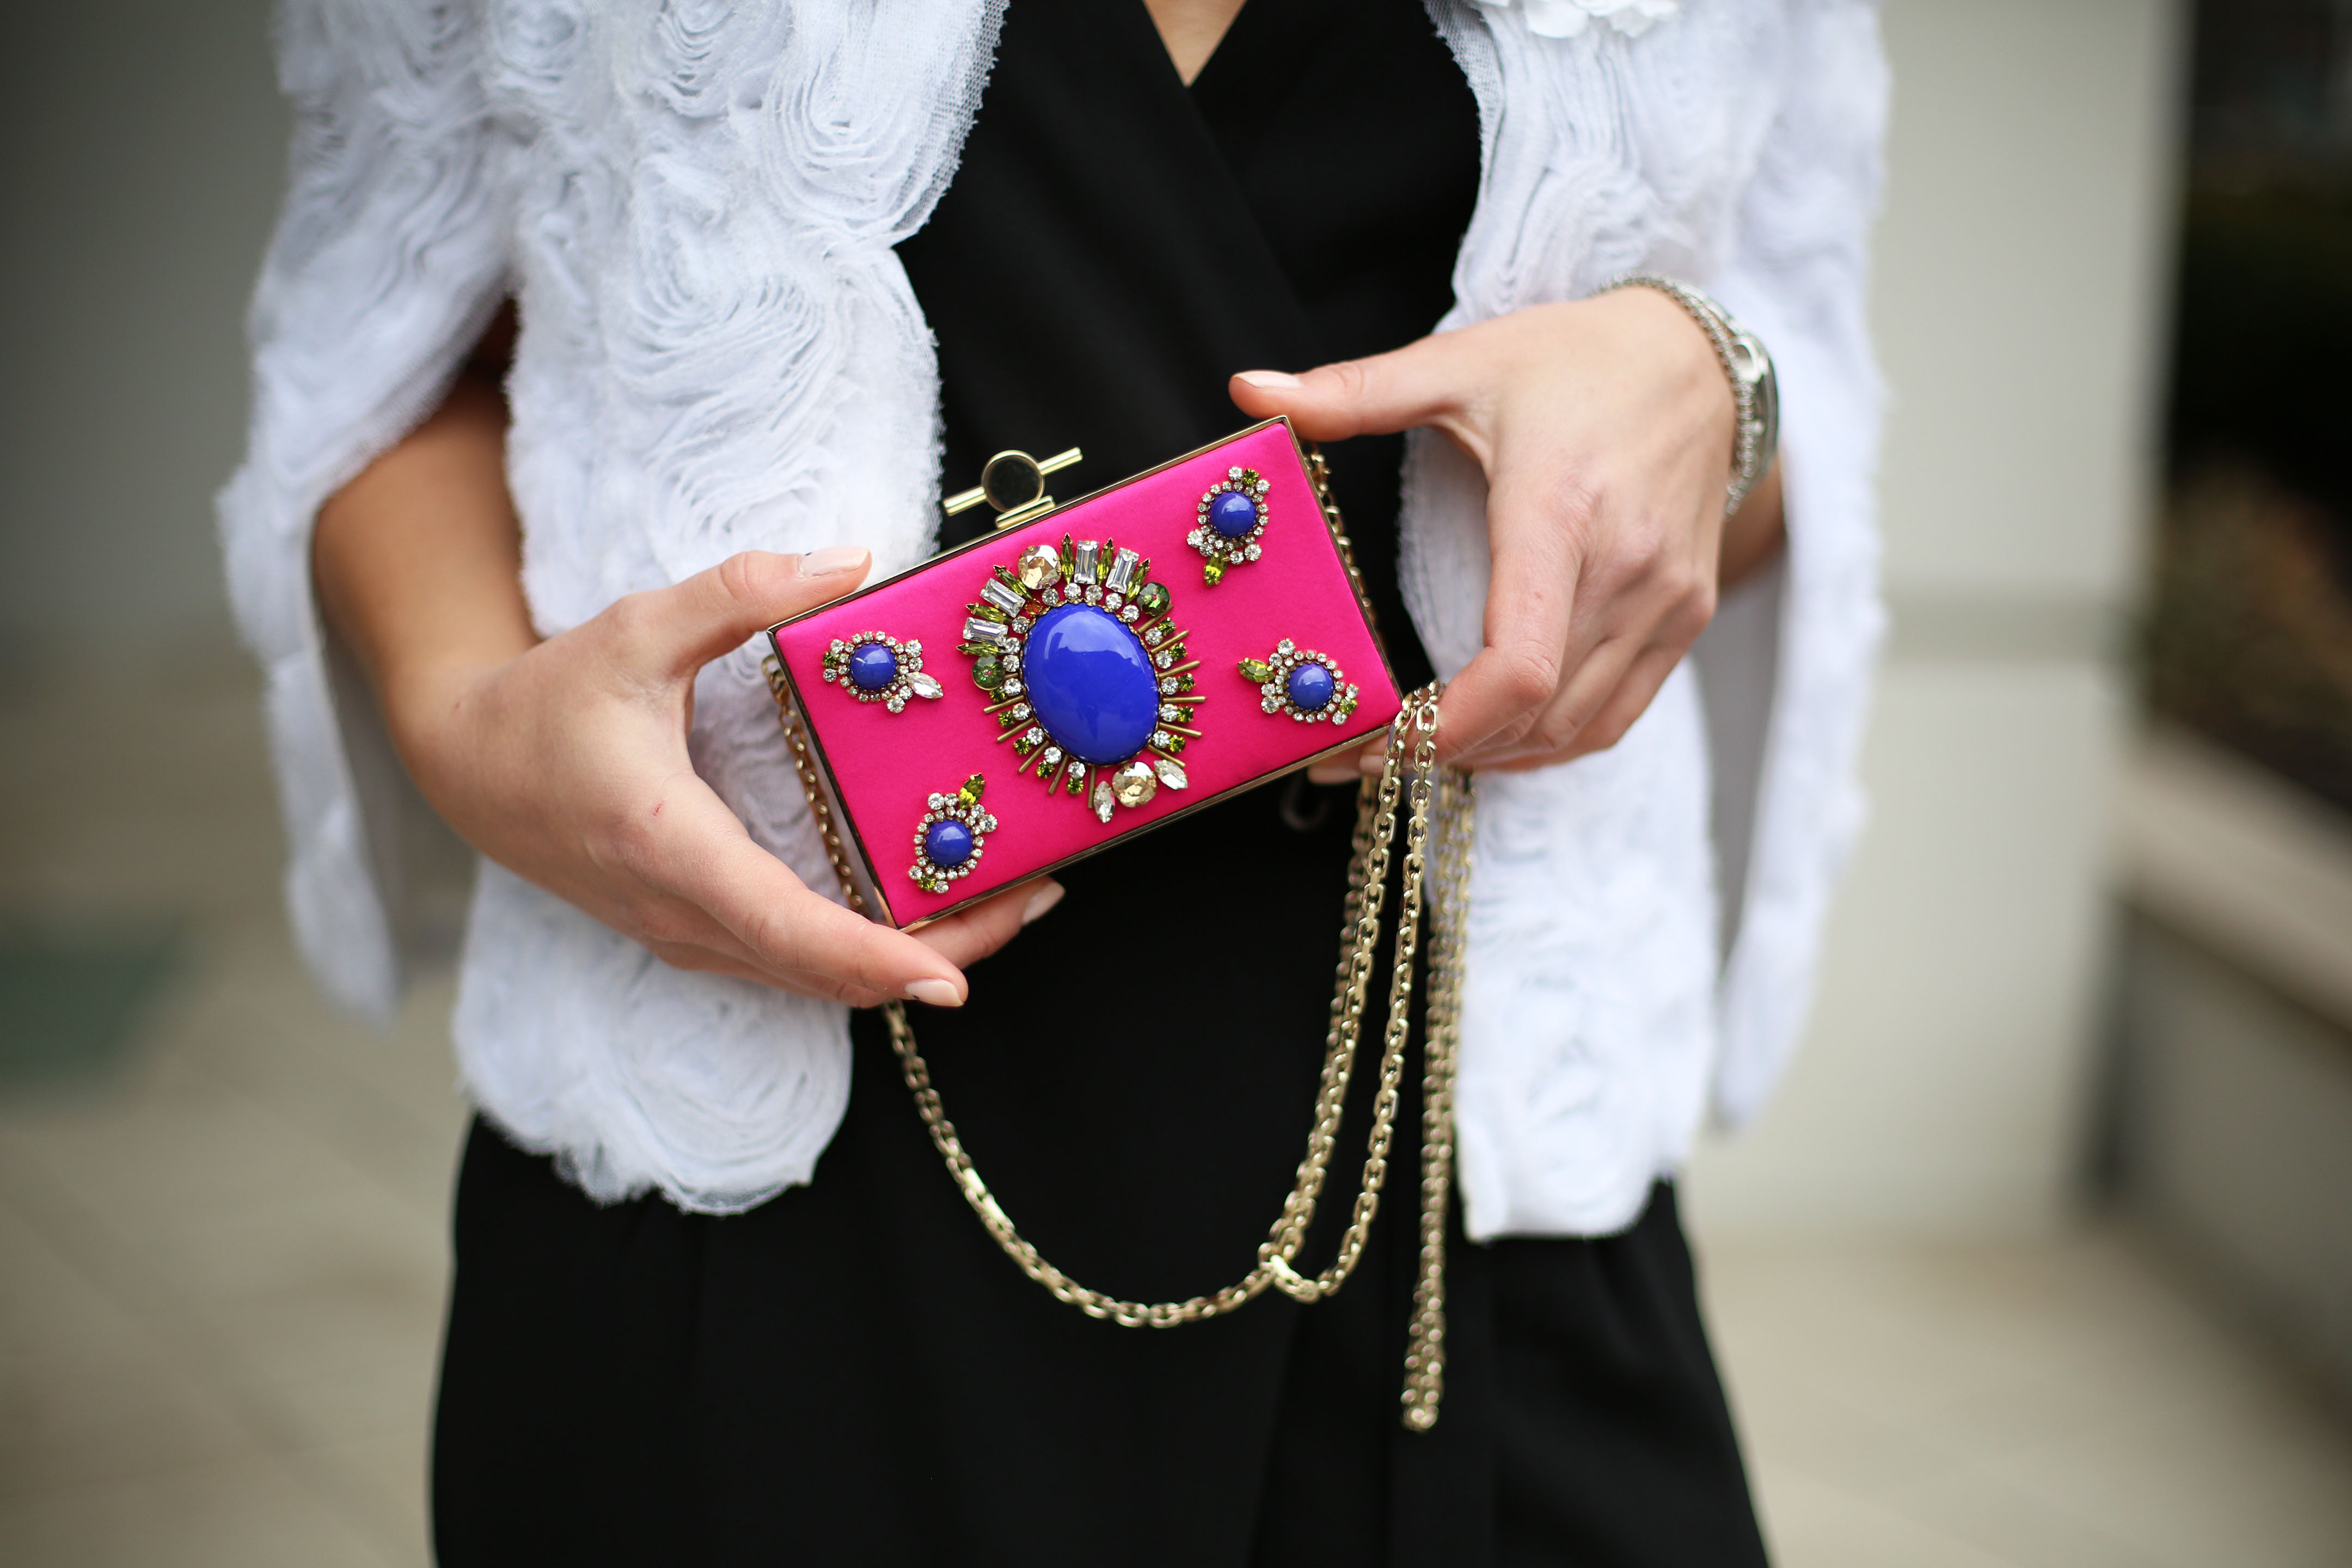 hot-pink-clutch-wedding-guest-outfit-inspo-box-clutch